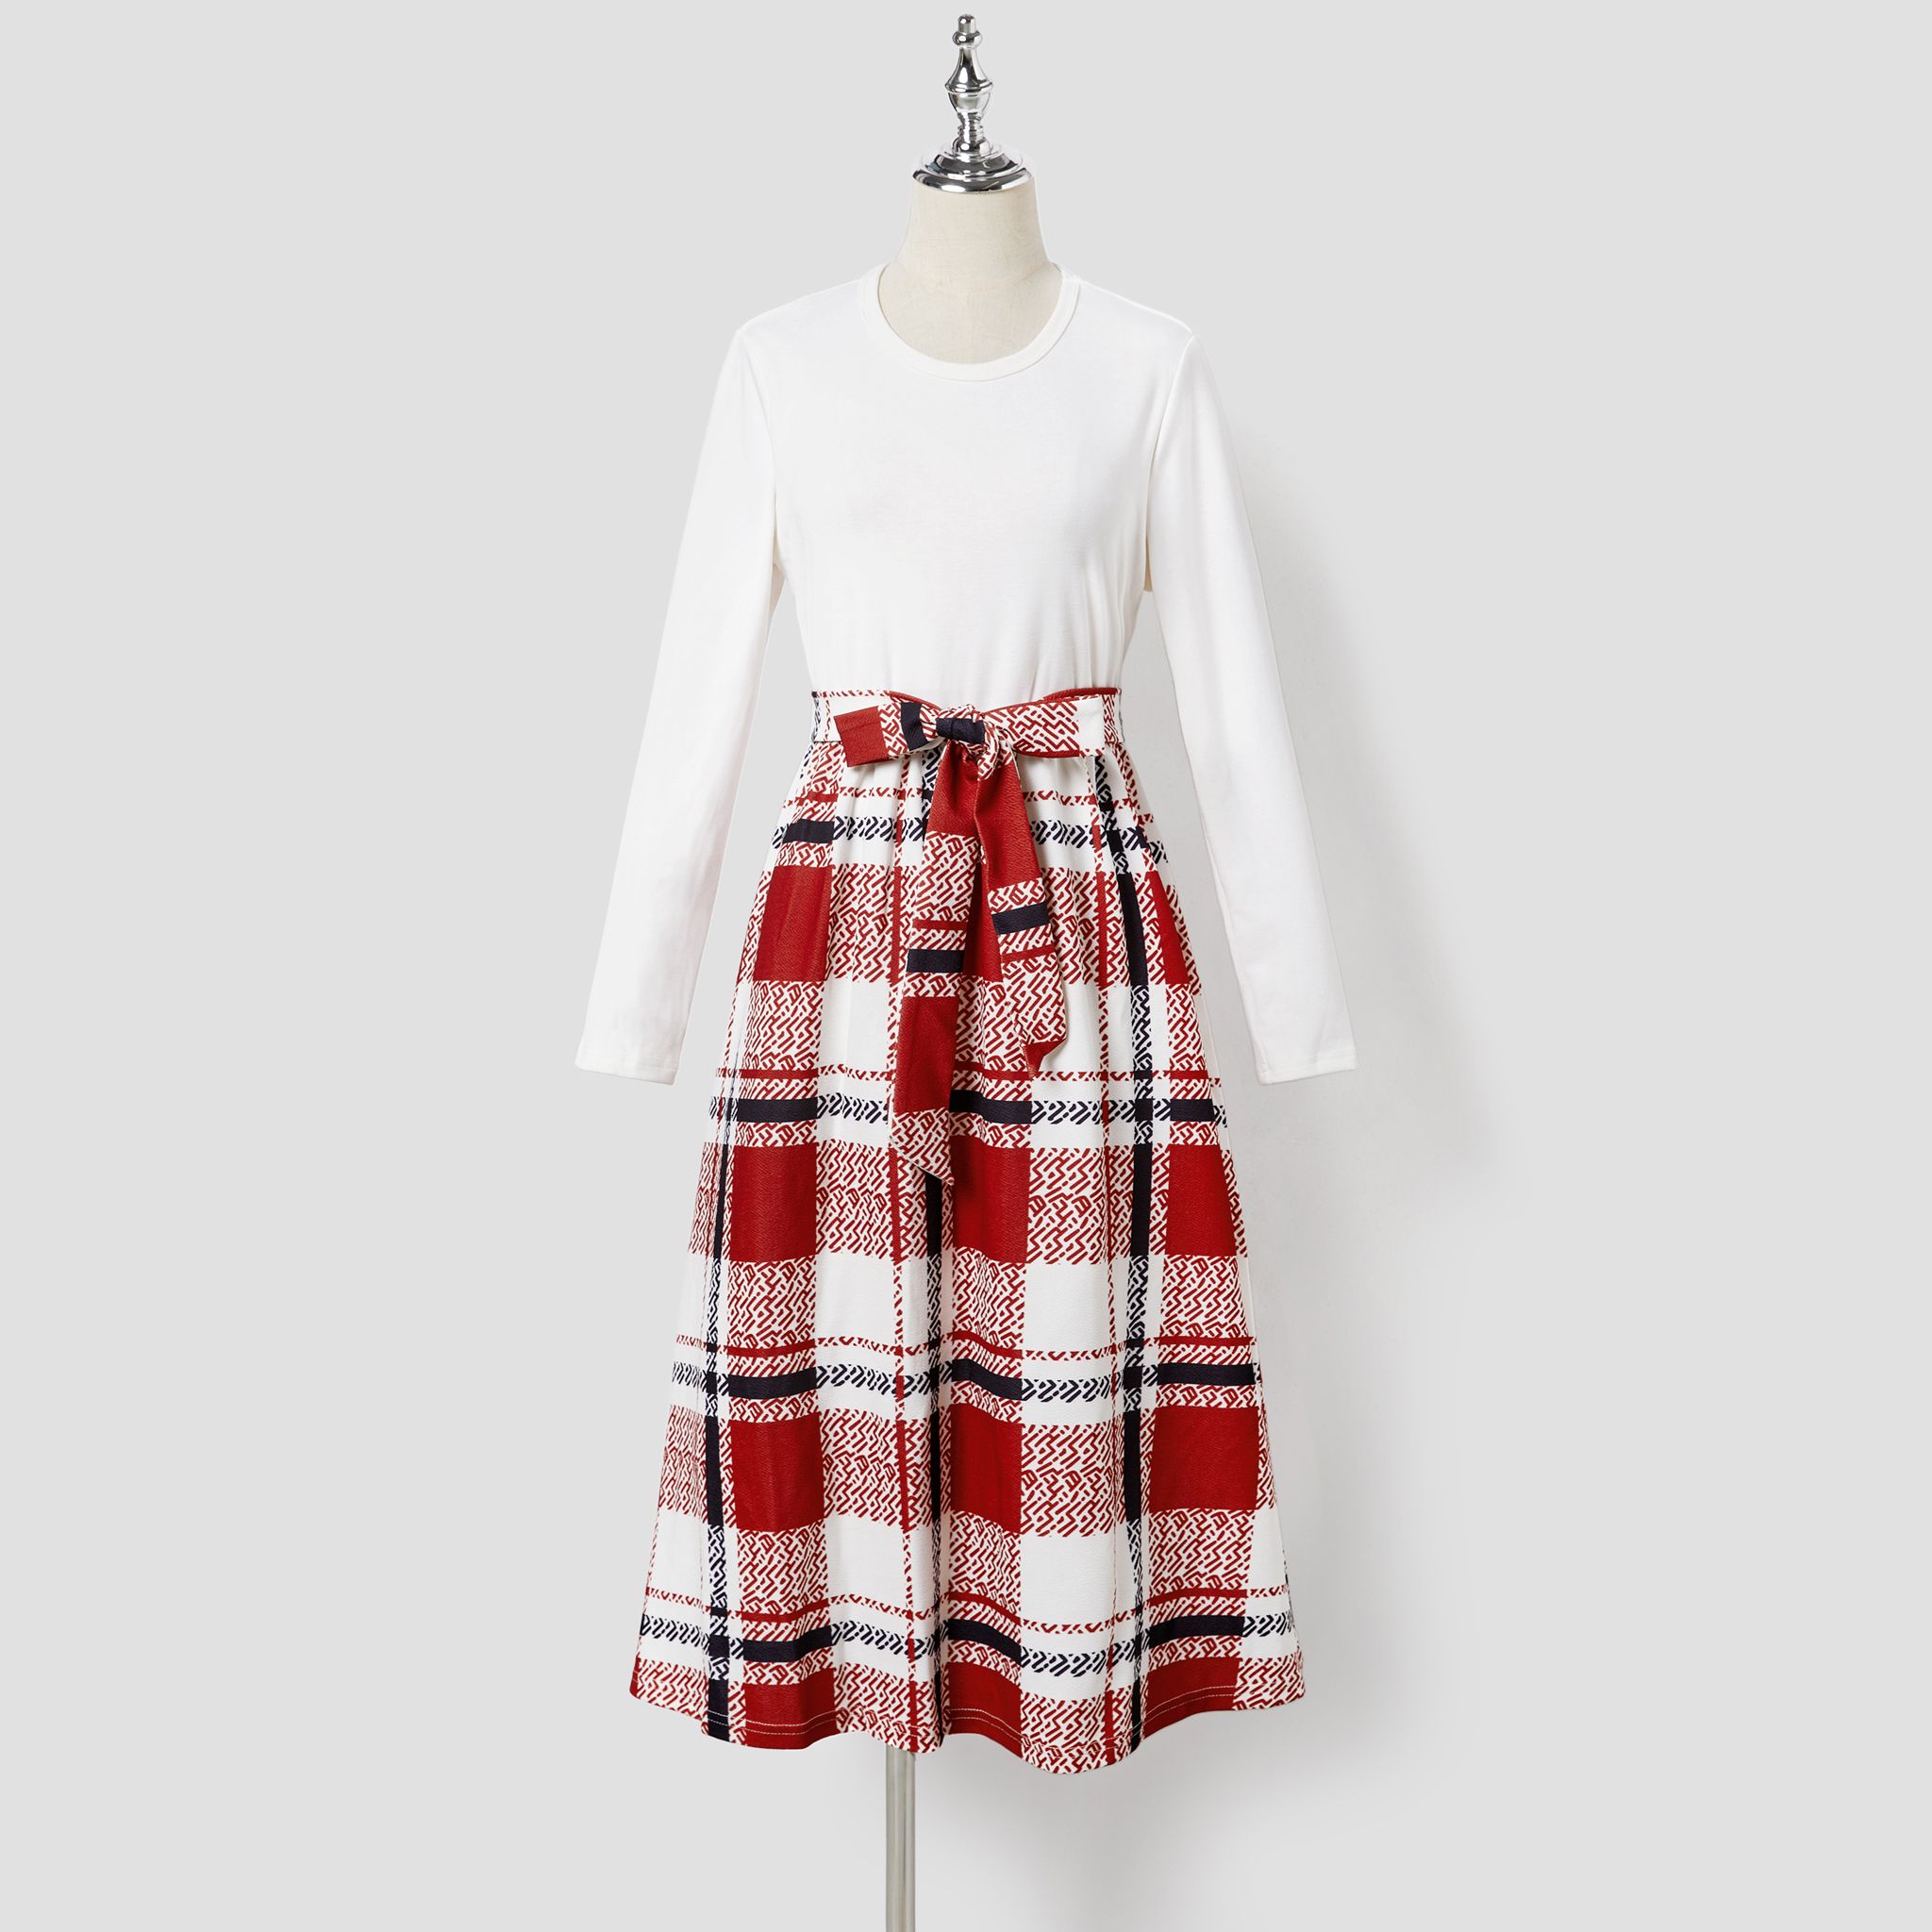 Family Matching Casual Long-sleeve Color-block Tops & Grid/Houndstooth Belted Dresses Sets